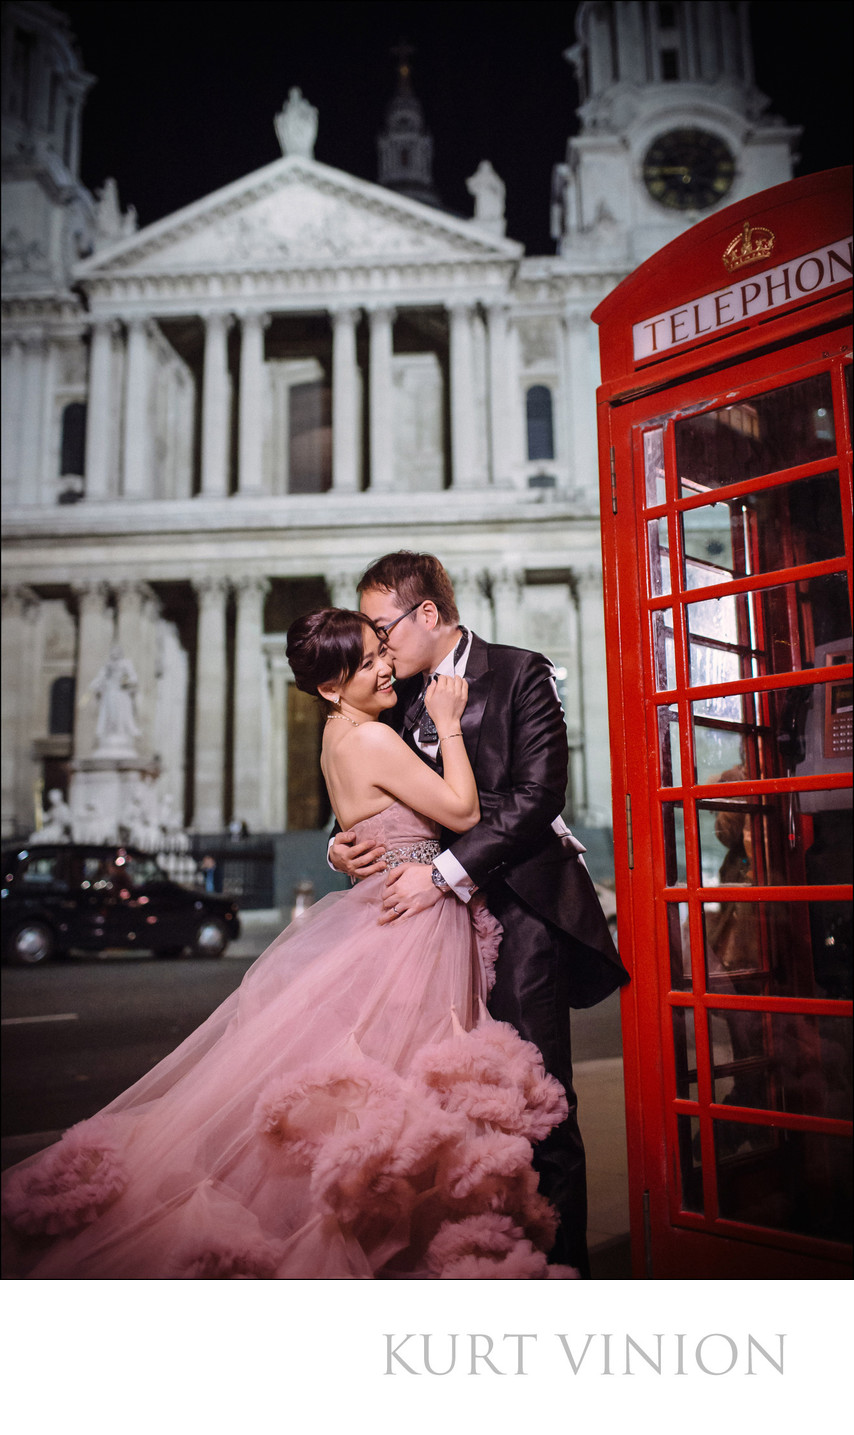 Kissing couple in front of St. Pauls Cathedral, London